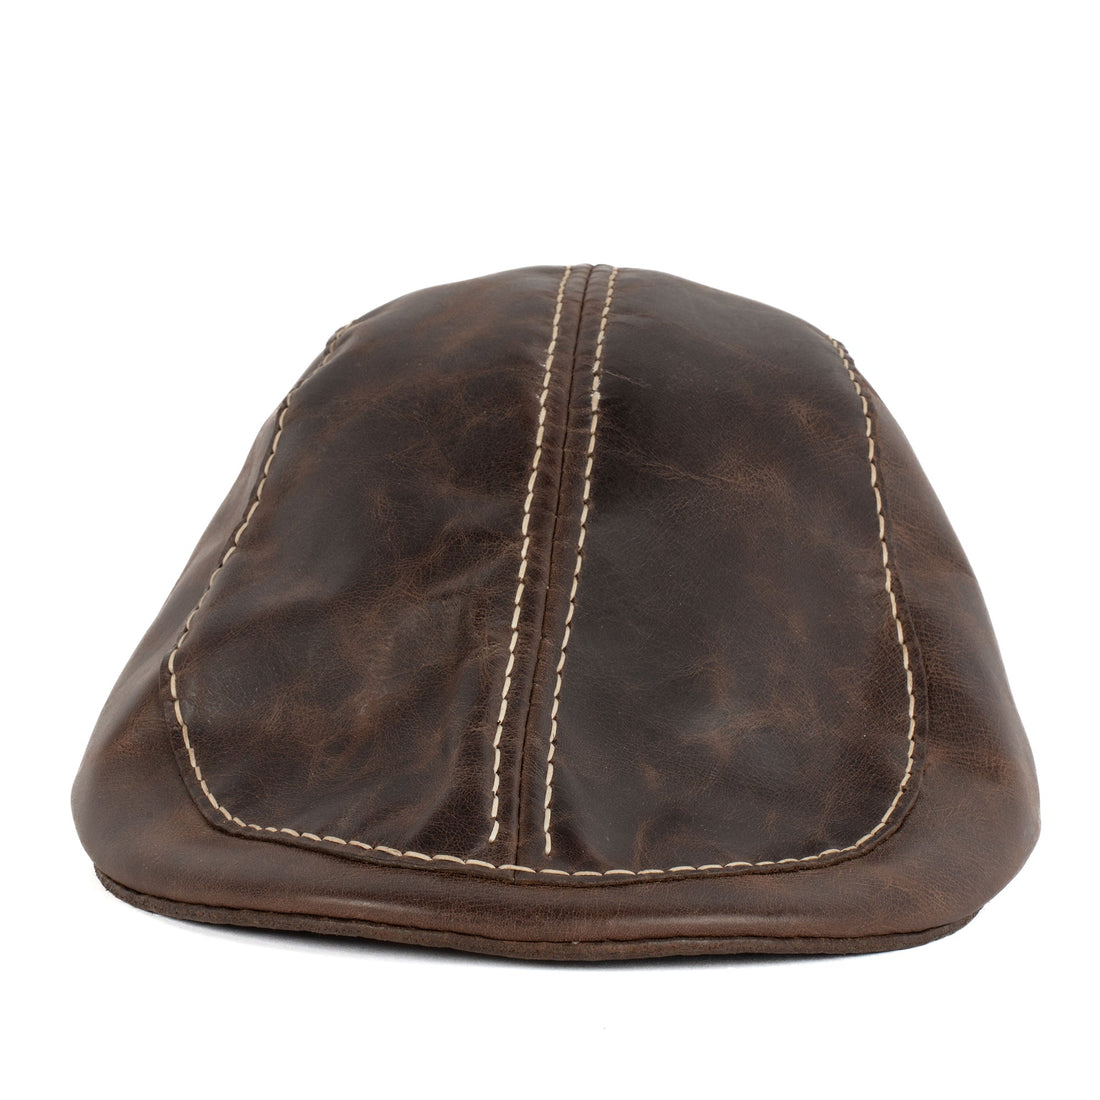 Molokai Brown Leather Hat - Small: 52 cm - Accessories Zengoda Shop online from Artisan Brands